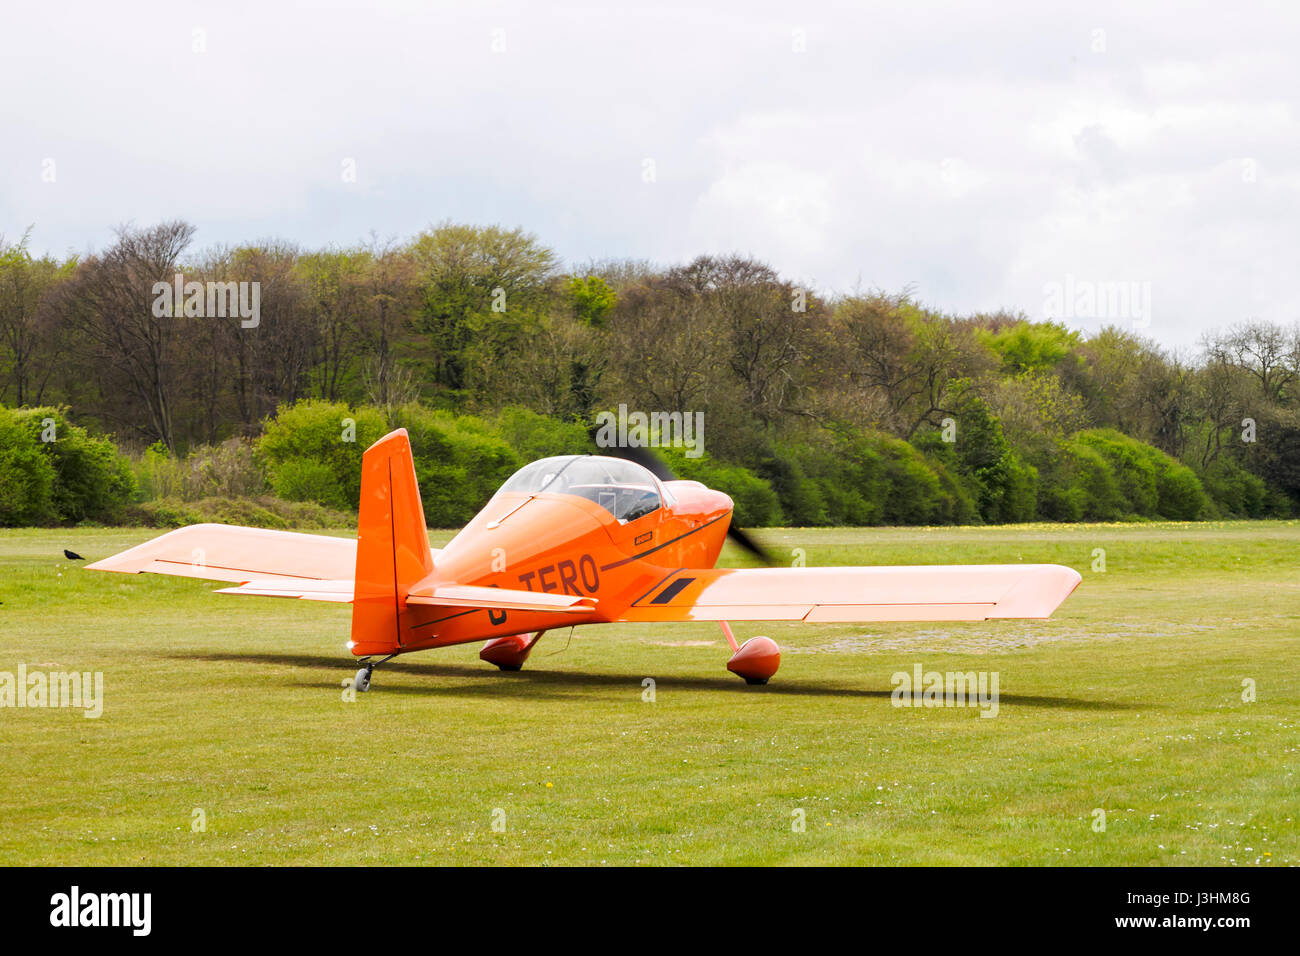 G-TERO is a 2014 built Vans RV-7 fixed wing, single engined light aircraft seen here on the taxiway at Popham Airfield, Hampshire Stock Photo